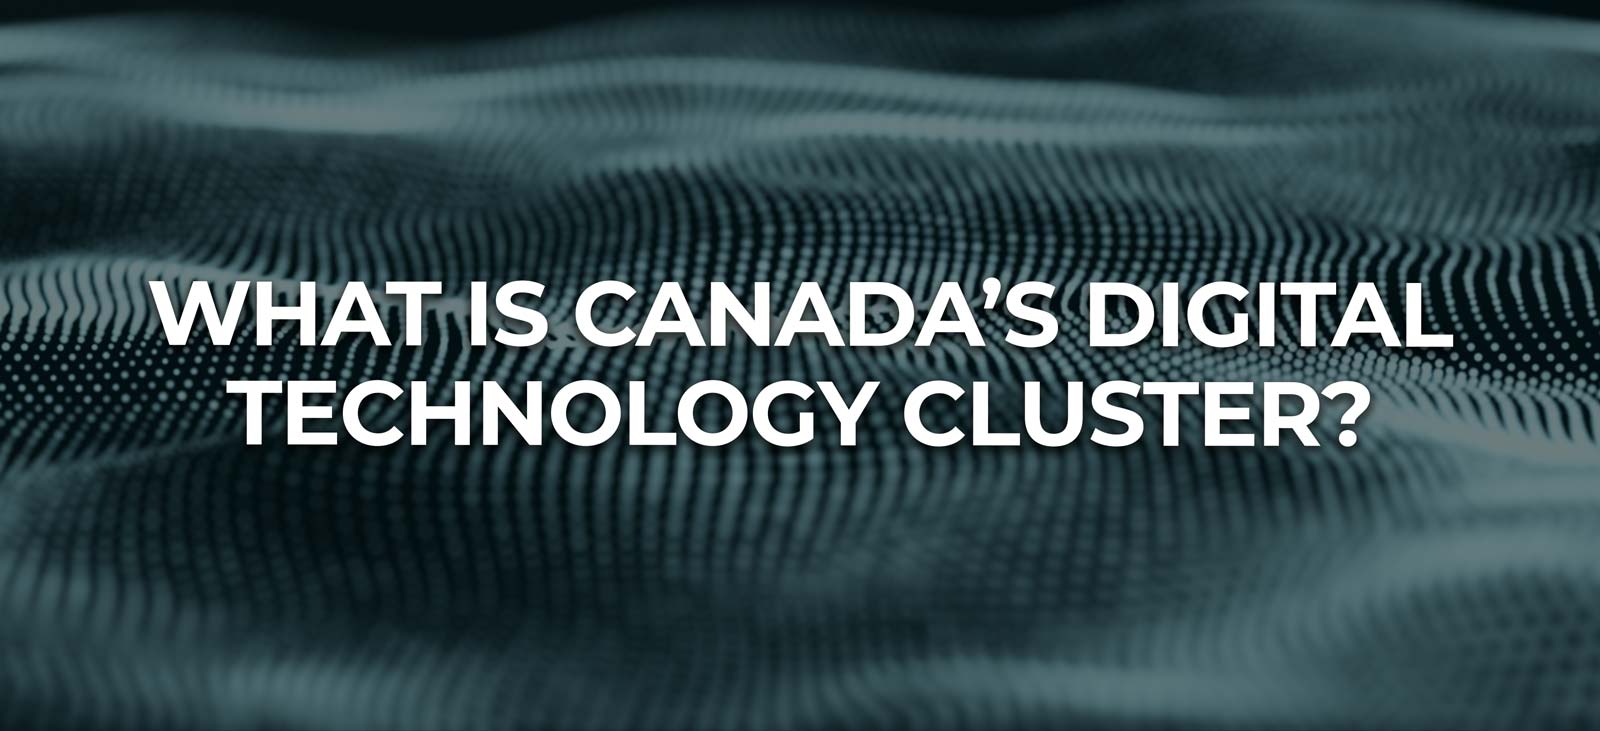 What Is Canada’s Digital Technology Cluster?